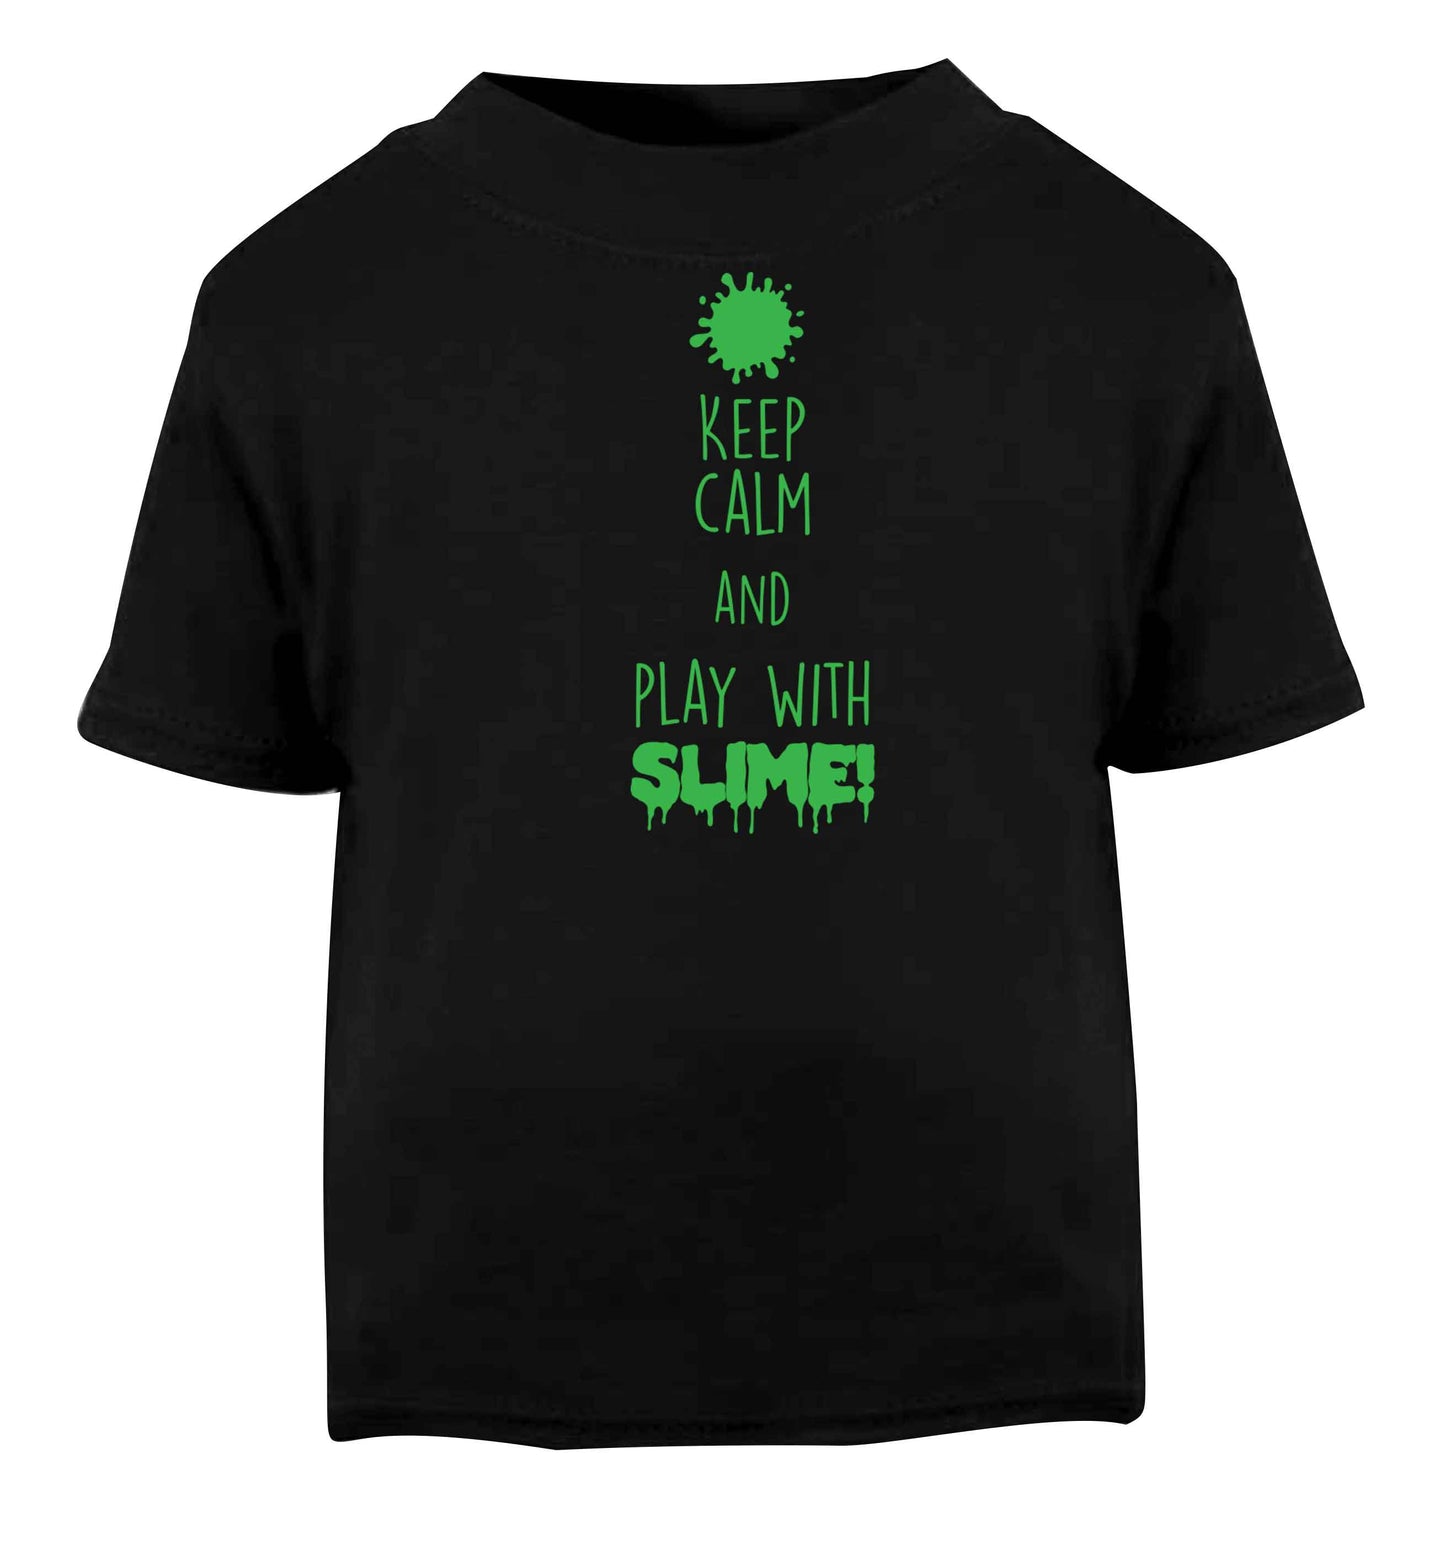 Neon green keep calm and play with slime!Black baby toddler Tshirt 2 years